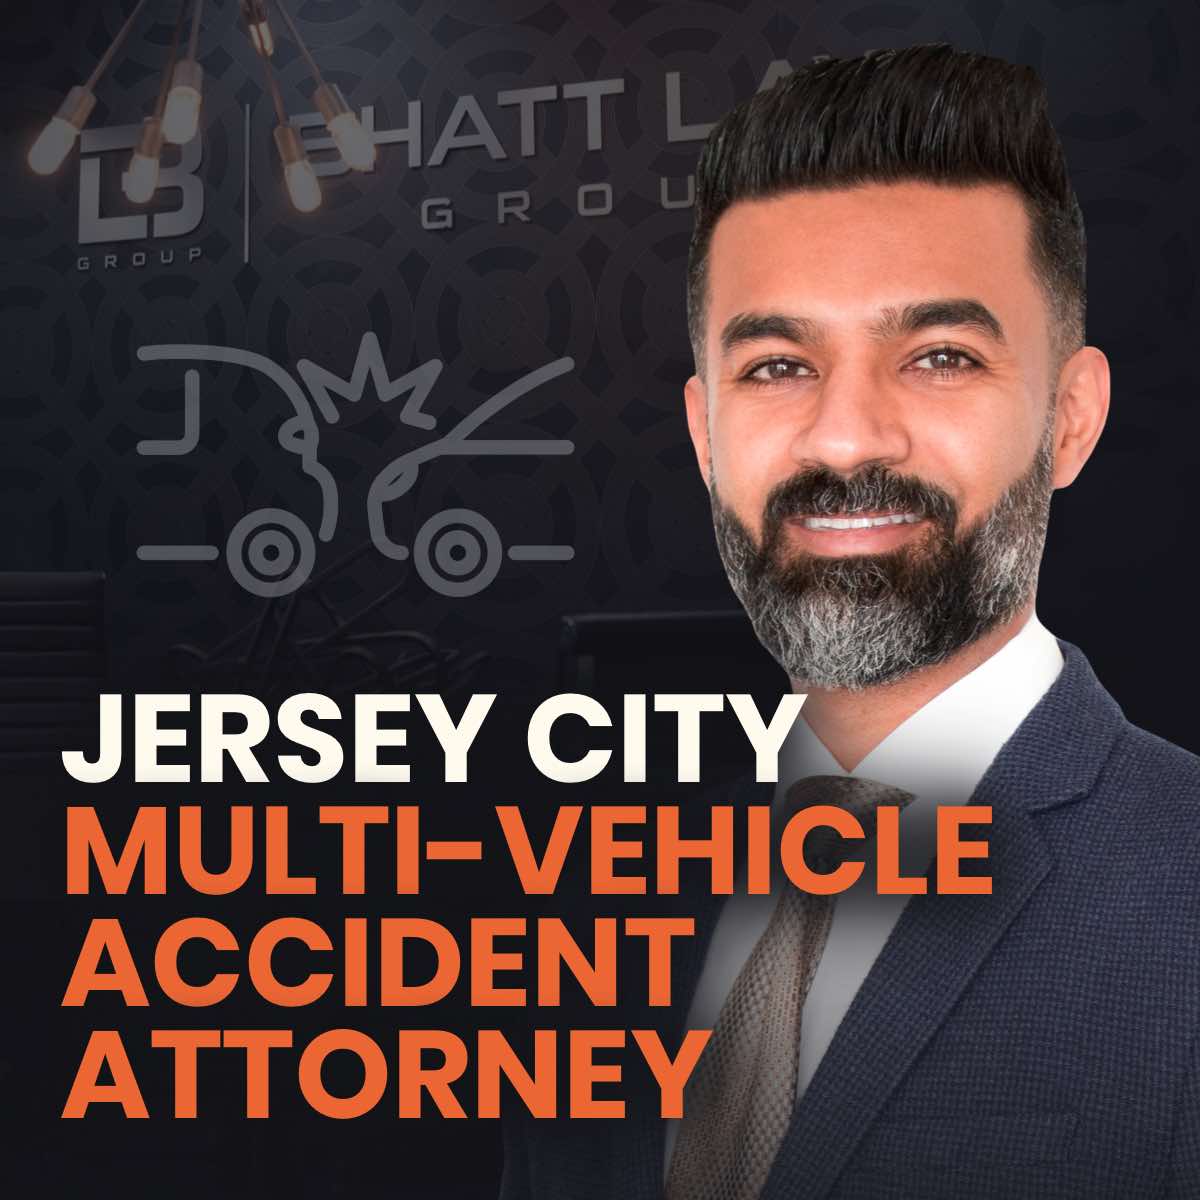 Jersey City Multi-Vehicle Accident Attorney